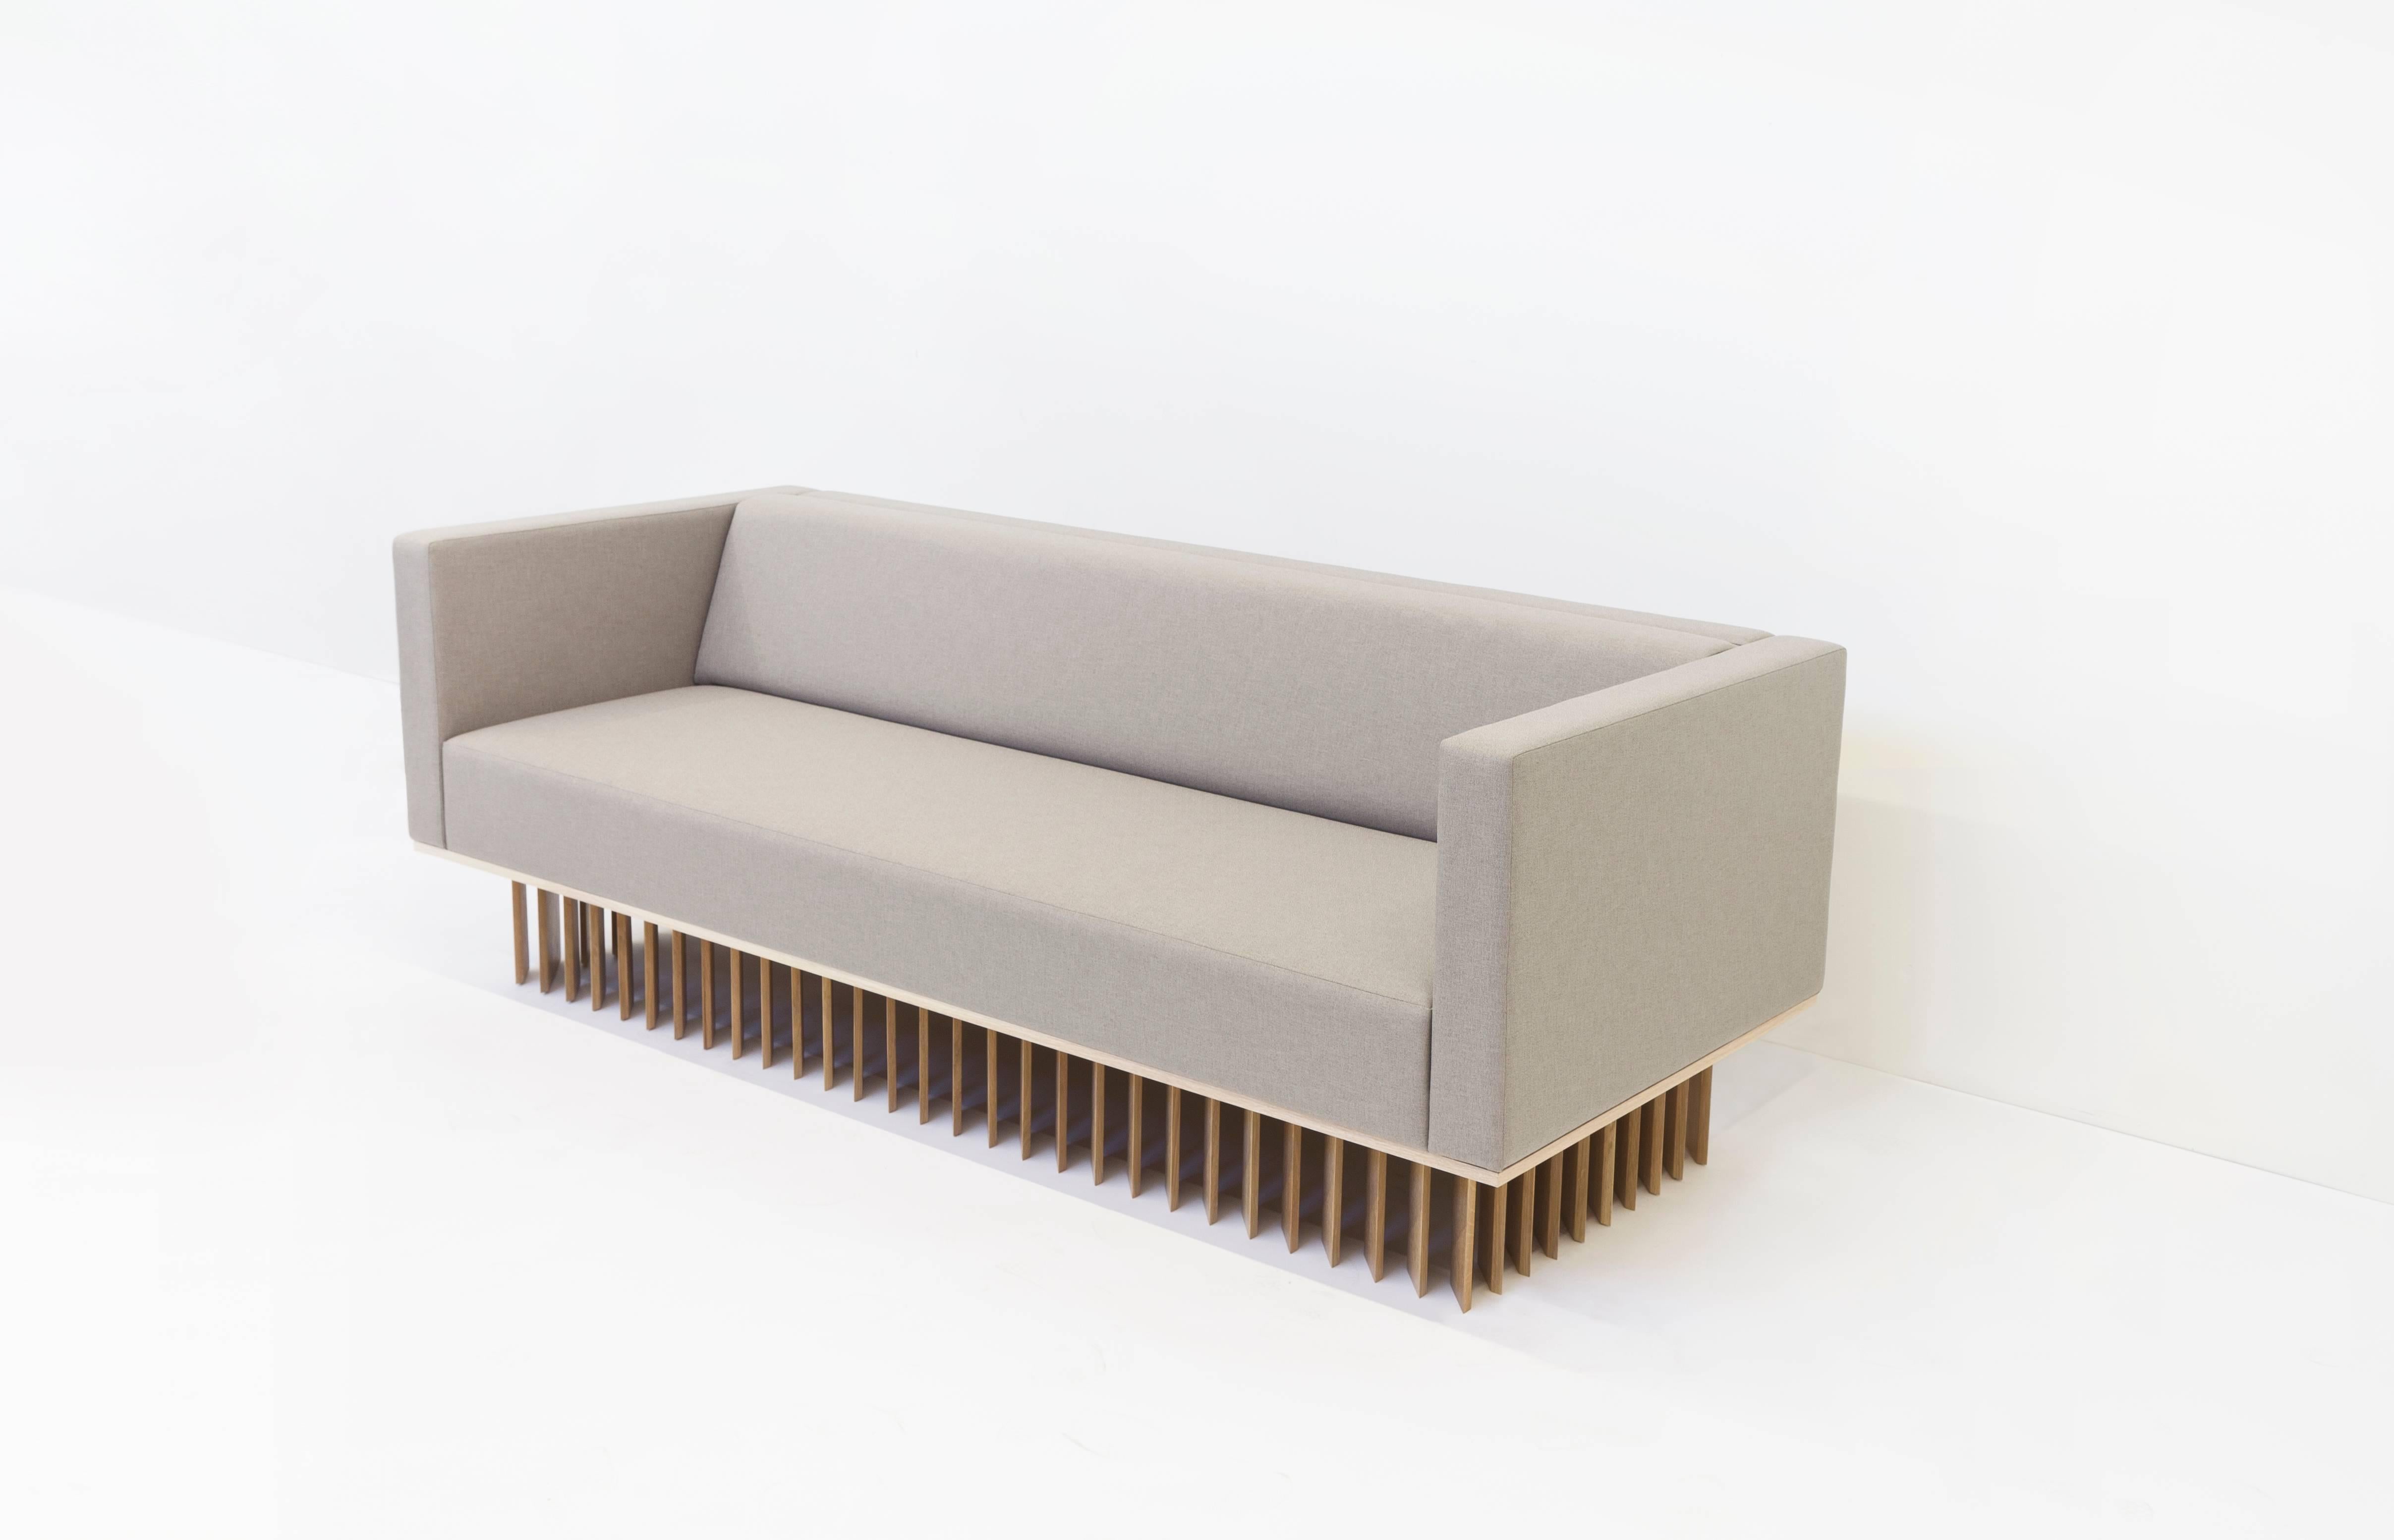 Not So General Gallery in Los Angeles is proud to present the Angled Wood Bar Sofa from design studio Early Wok. A modern masterpiece, the sofa is plushly upholstered in manner by Maharam, the seat cushion of the sofa sits atop a white oakwood